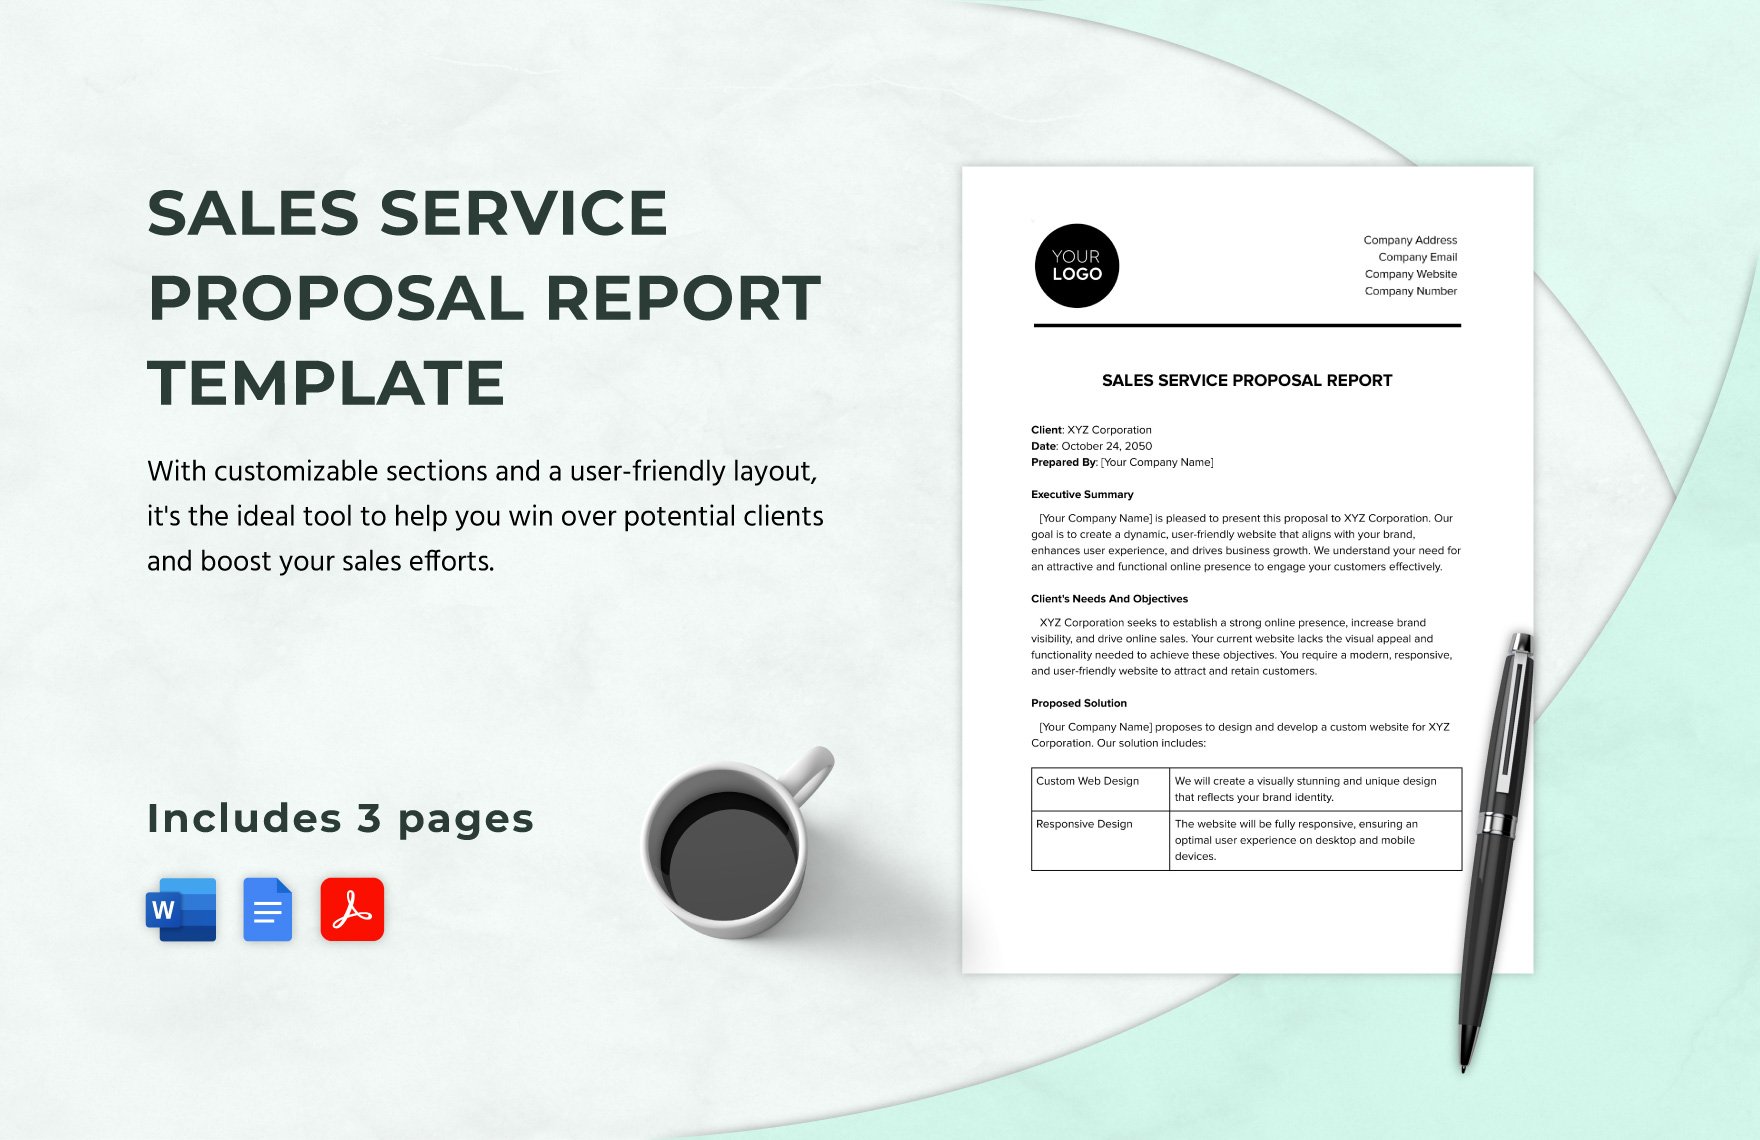 Sales Service Proposal Report Template in Word, Google Docs, PDF